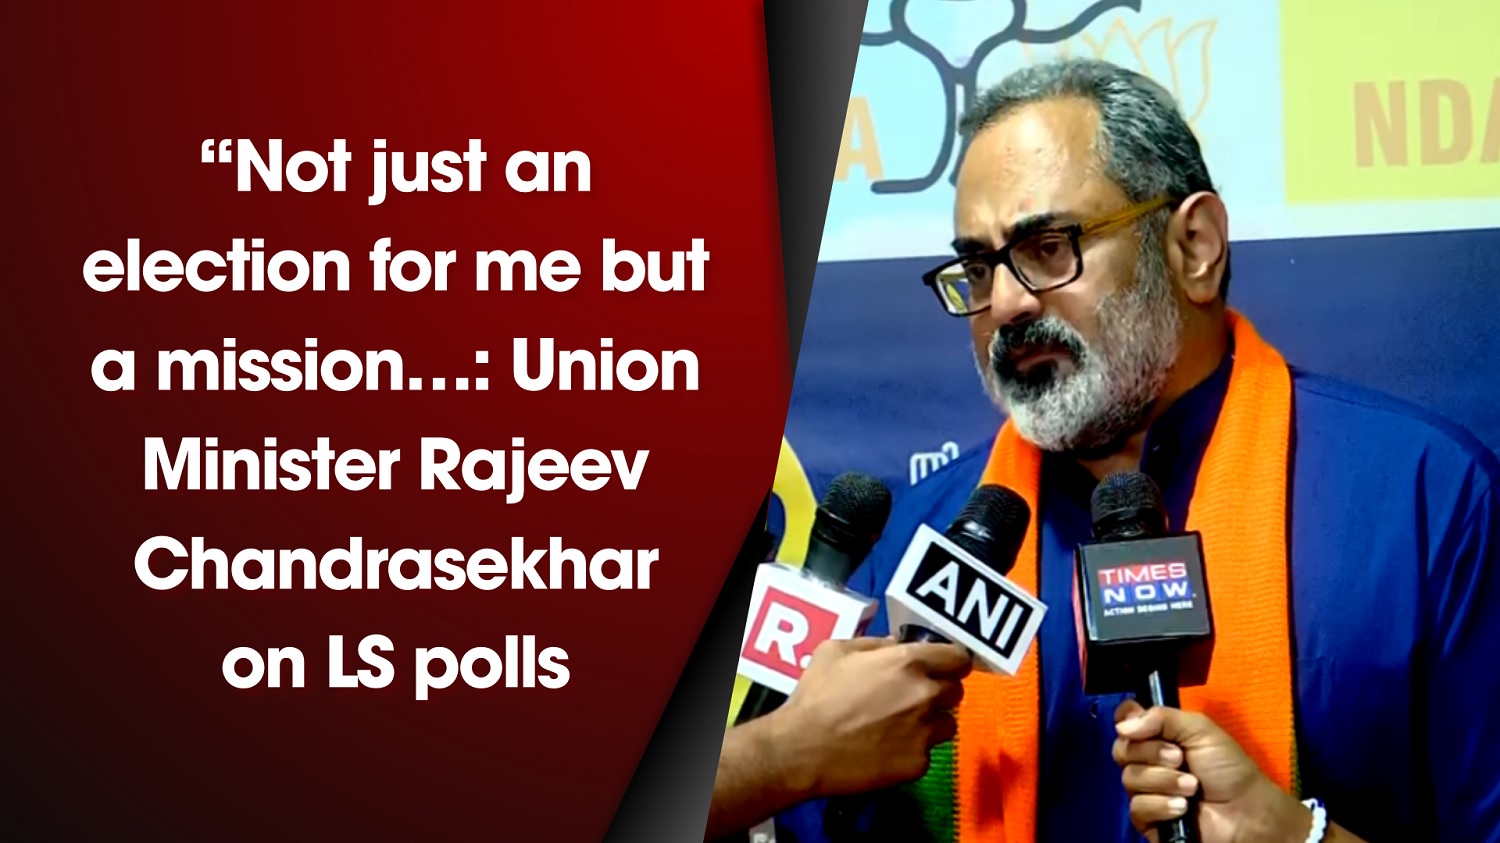 `Not just an election for me but a mission Union Minister Rajeev Chandrasekhar on LS polls